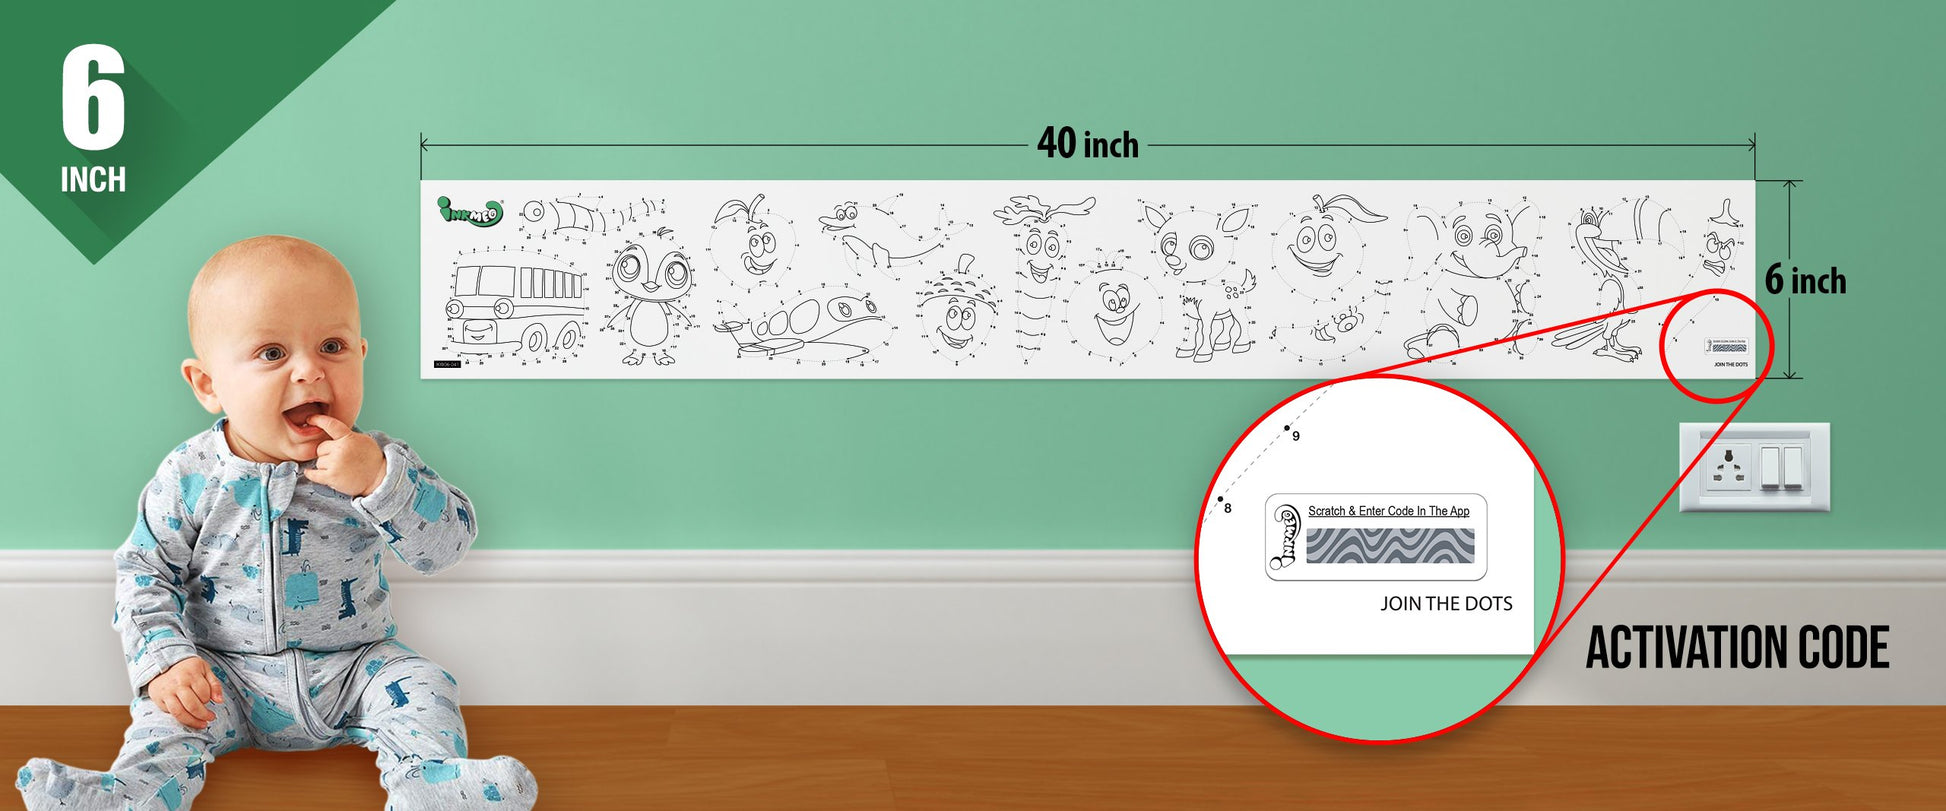 The image depicts a 6*40-inches roll adhered to the wall with a baby playing nearby, and the activation code is zoomed in separately.